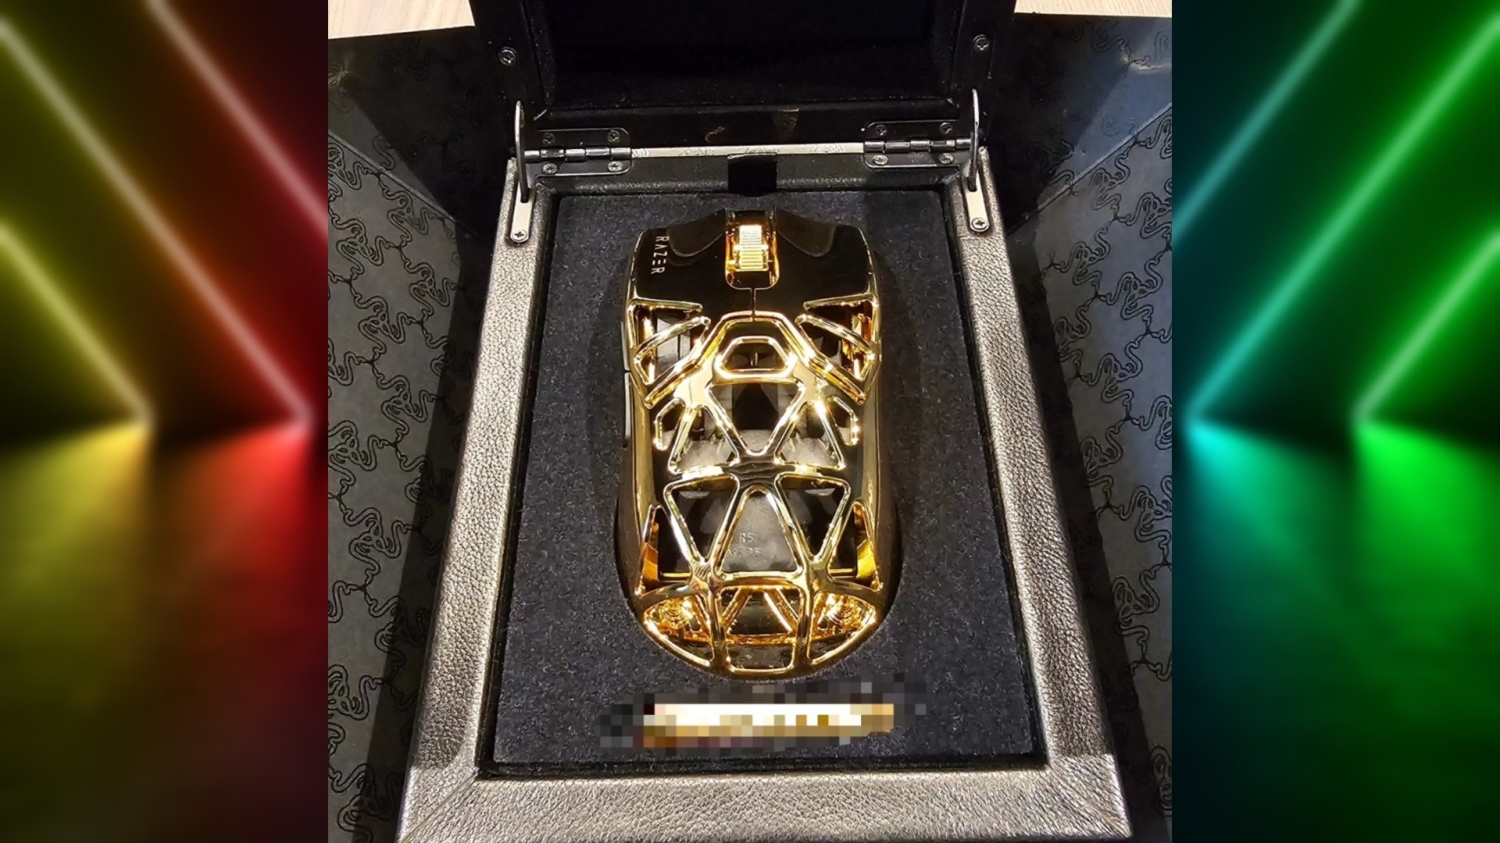 TweakTown Enlarged Image - Razer CEO Min-Liang Tan shared some pictures of a 24-karat gold Viper Signature Mini gaming mouse, image credit: Twitter.